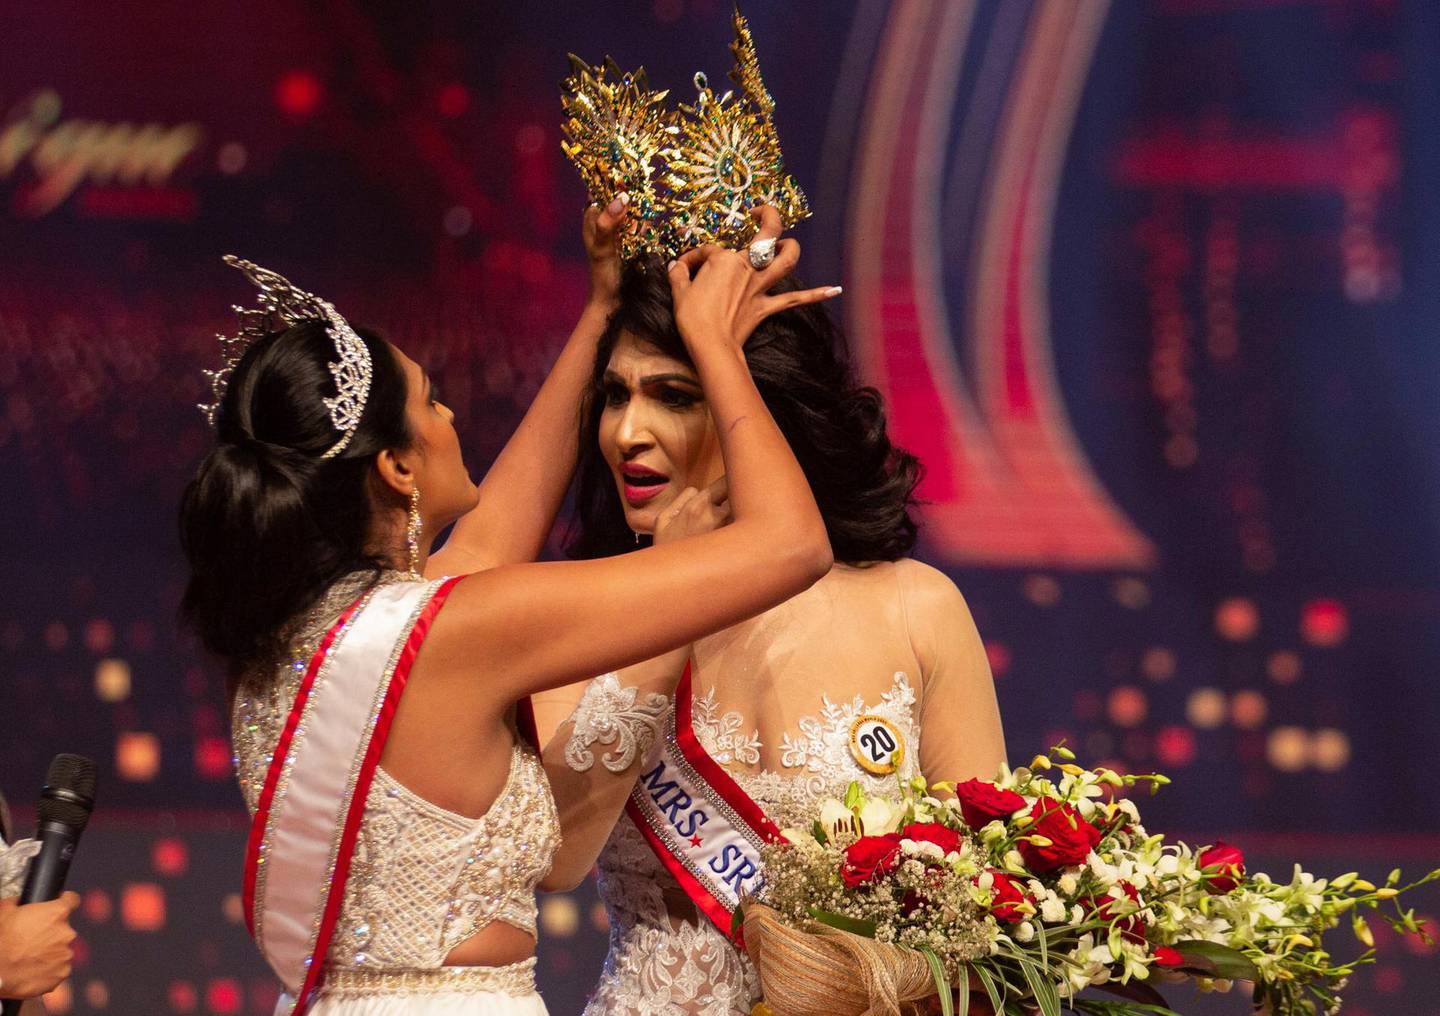 Reigning Mrs World Caroline Jurie, forcibly removes the Mrs Sri Lanka winner Pushpika De Silva's crown as Jurie declared that the winner was ineligible because she was divorced, during the Mrs Sri Lanka pageant, in Colombo, Sri Lanka April 4, 2021. Picture taken April 4, 2021. REUTERS/Gimhana Pathirana NO RESALES. NO ARCHIVES